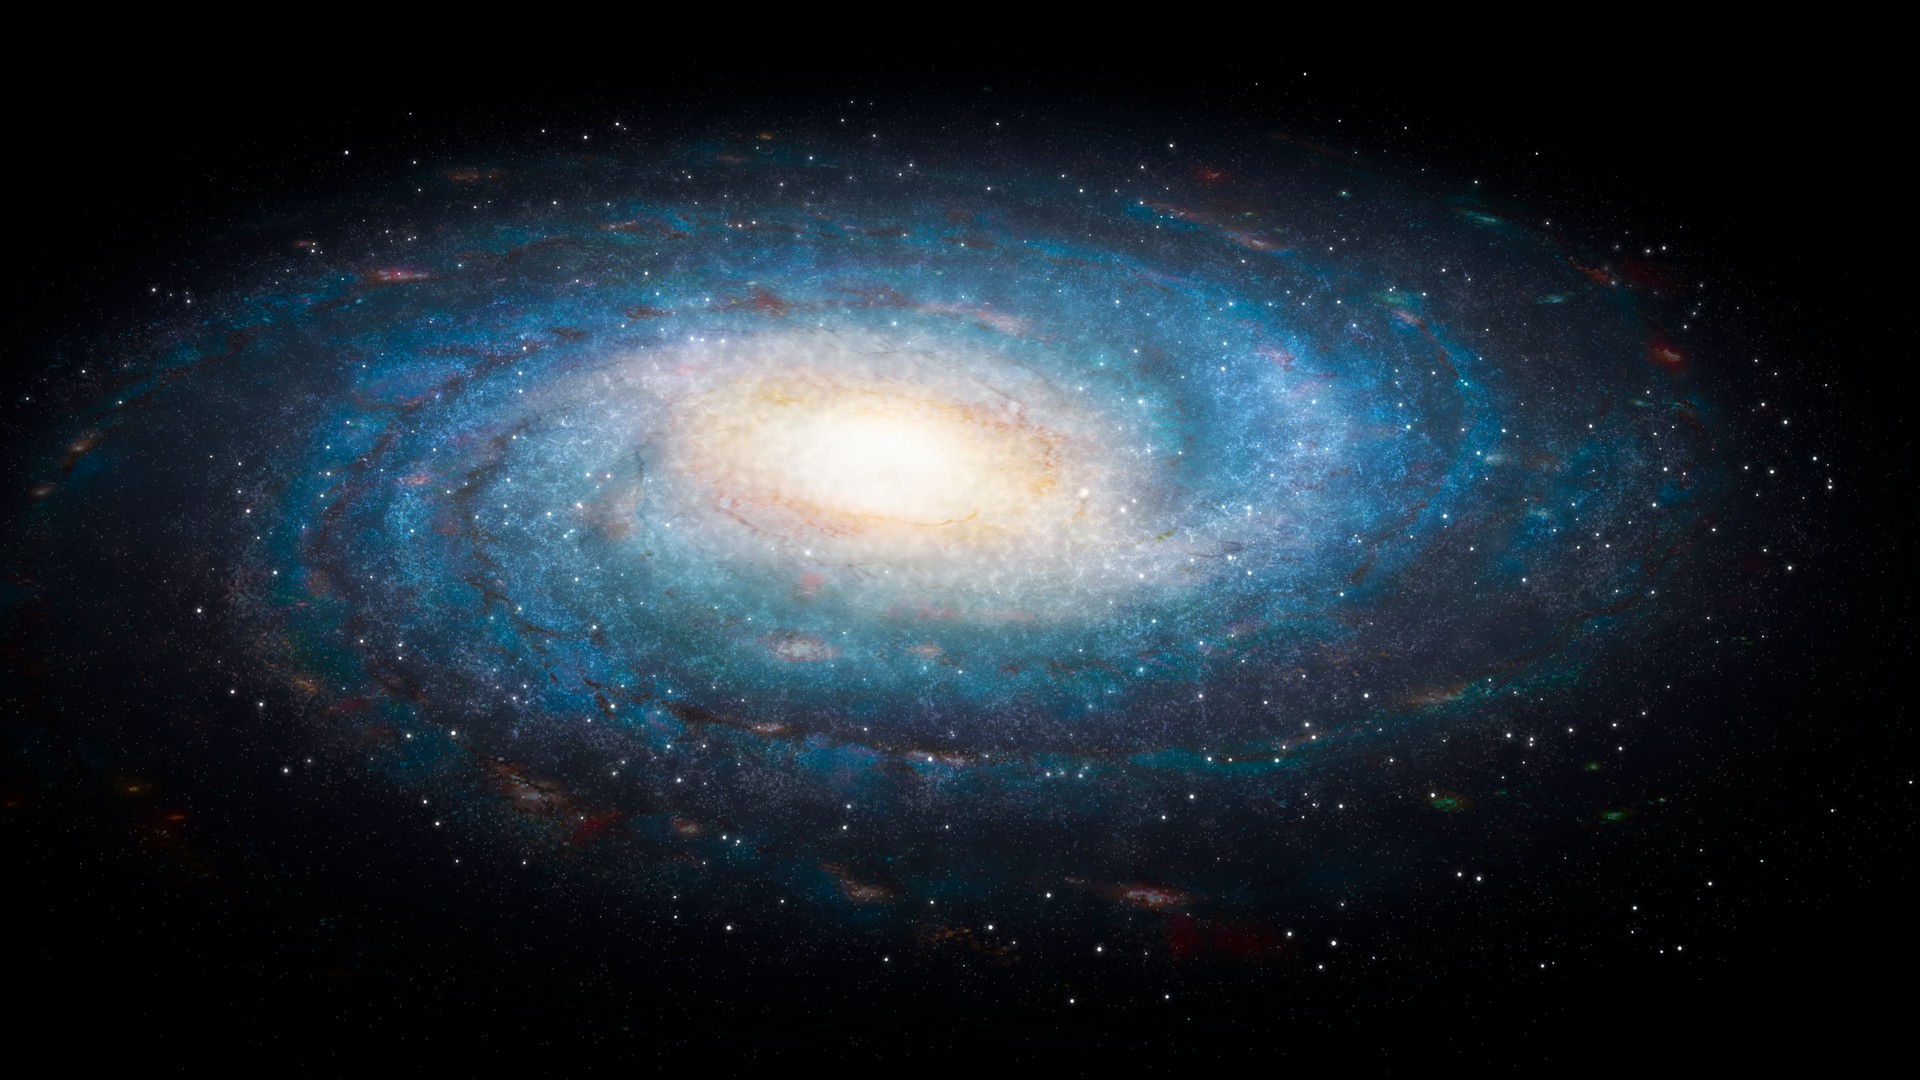 Does the Milky Way orbit anything? Space